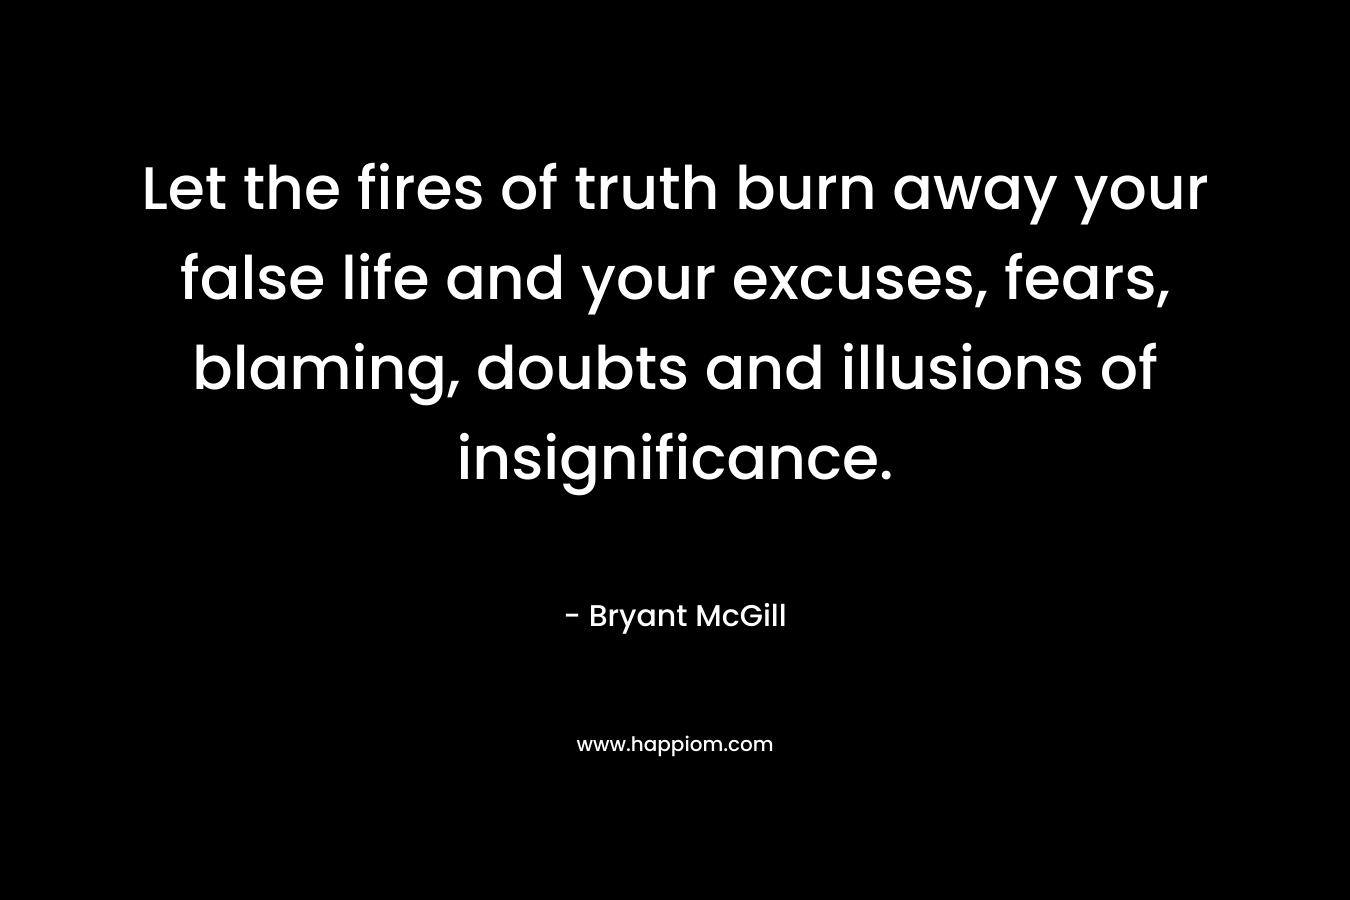 Let the fires of truth burn away your false life and your excuses, fears, blaming, doubts and illusions of insignificance.